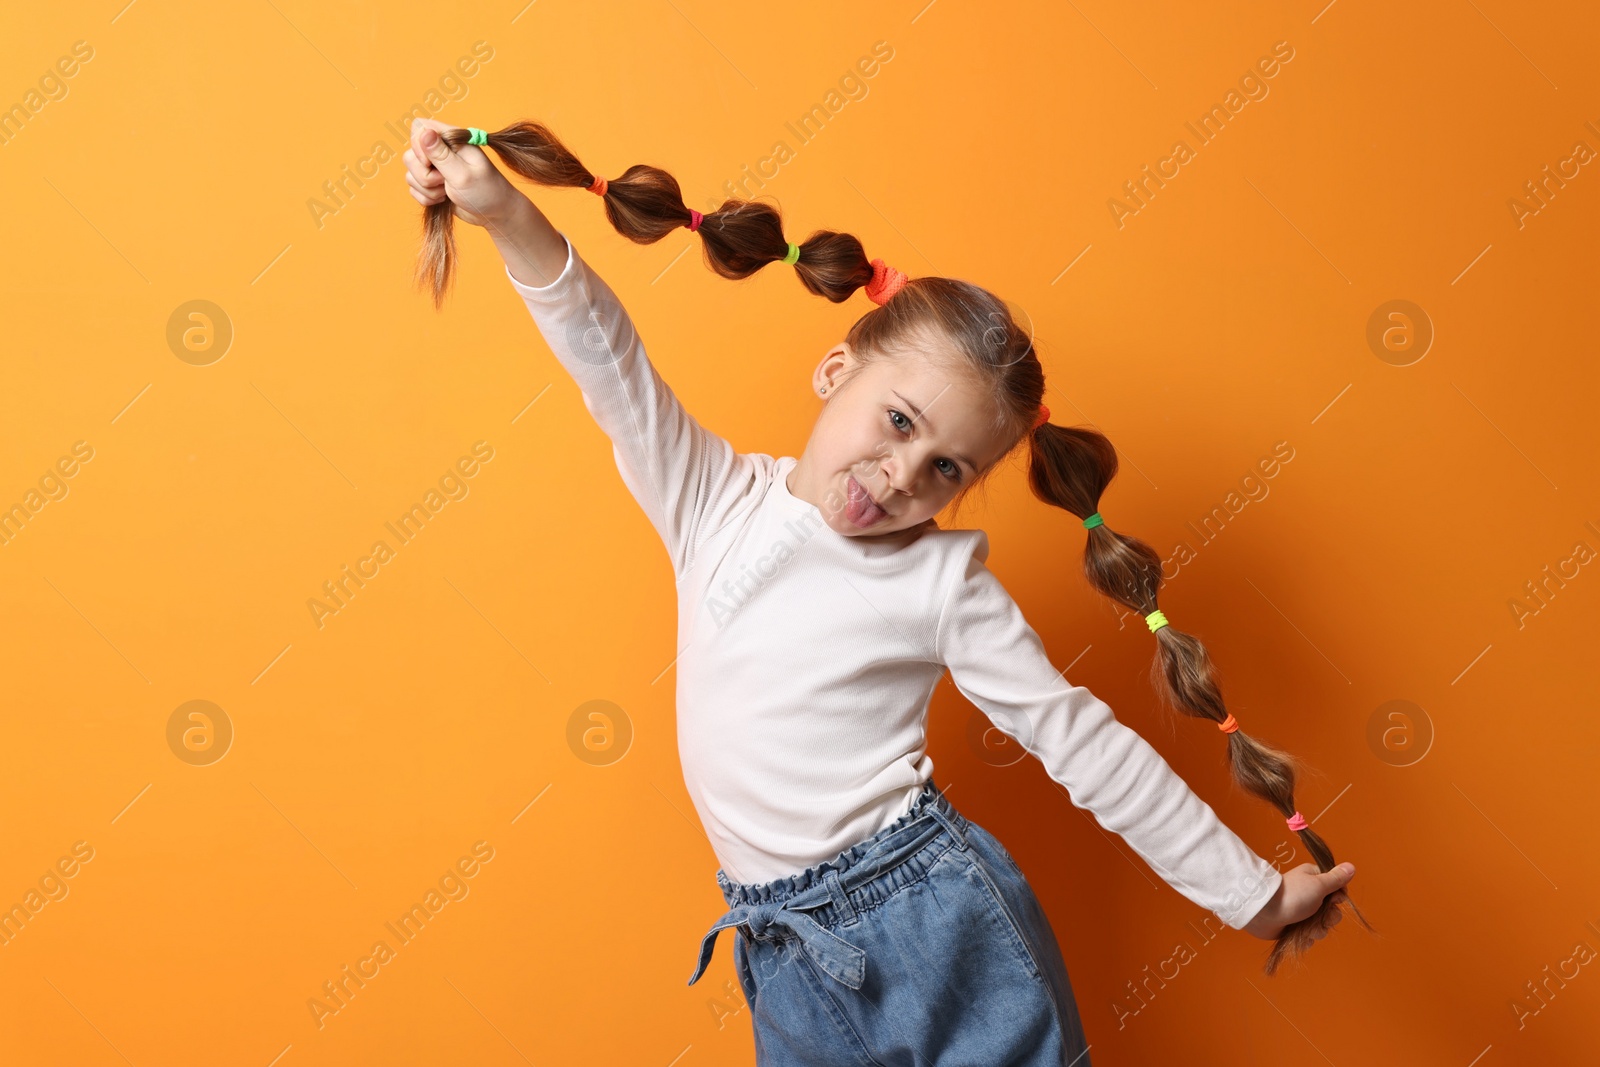 Photo of Cute little girl with beautiful hairstyle having fun on orange background